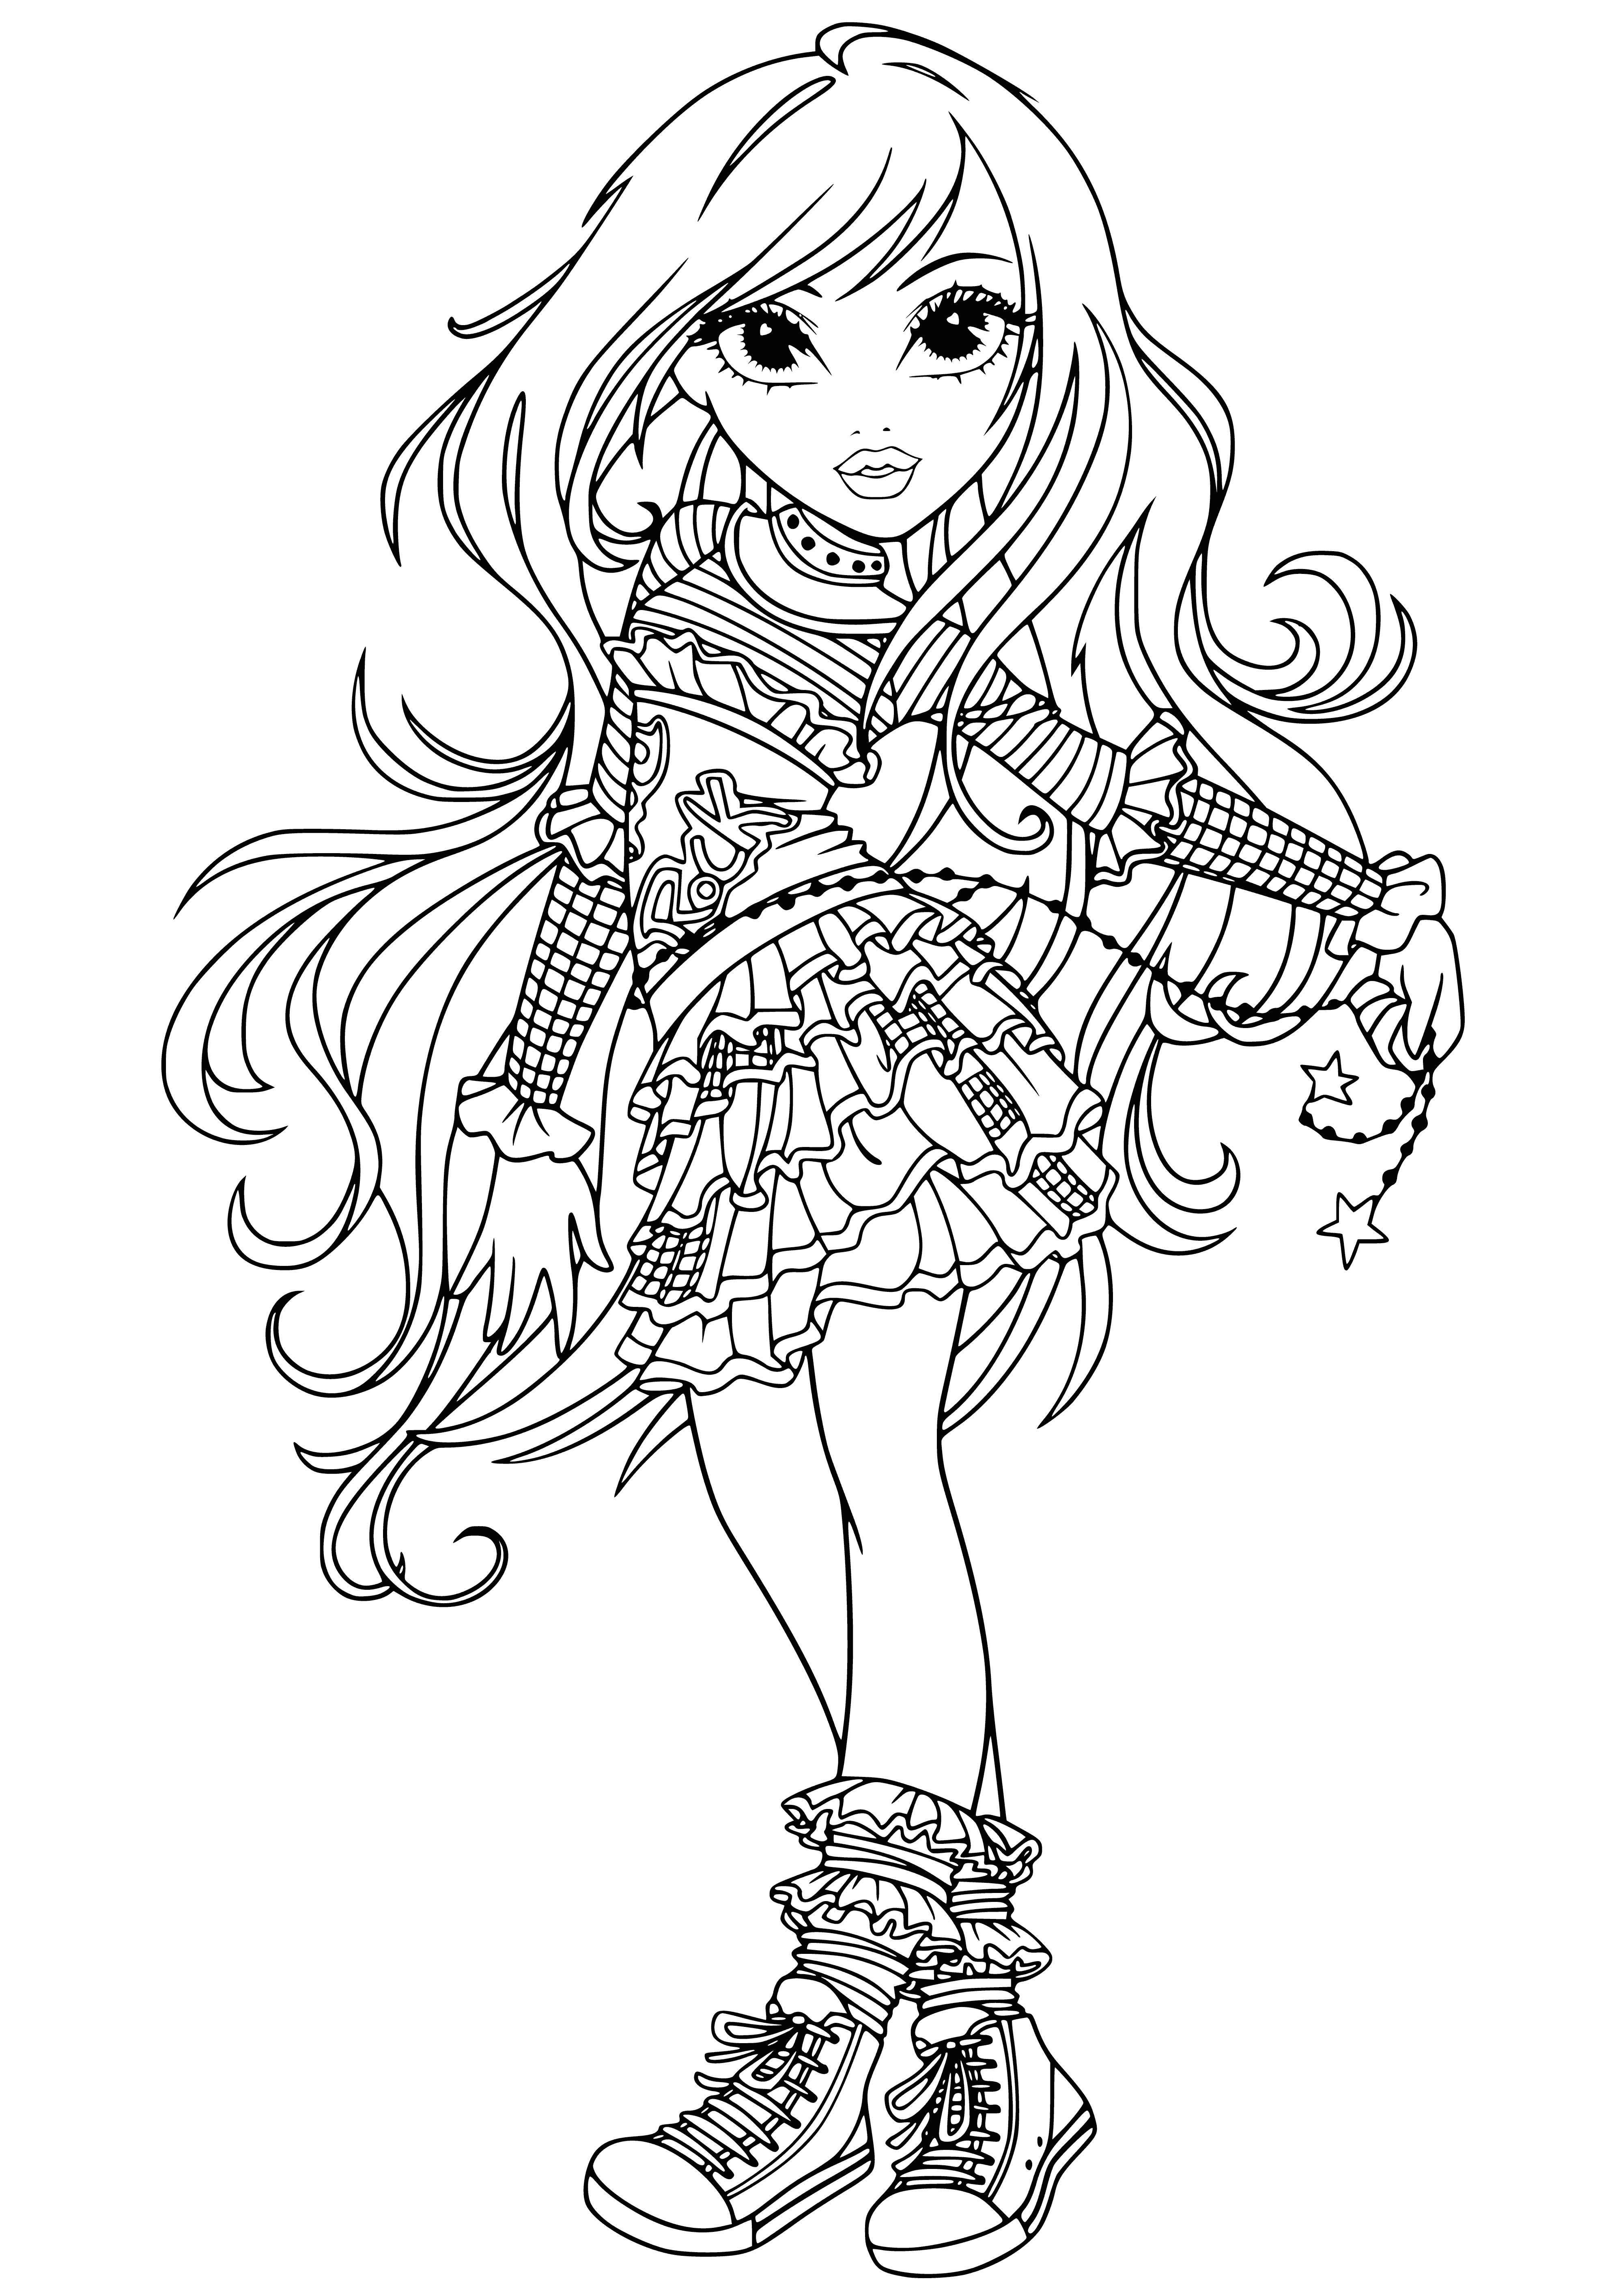 Lexa coloring page